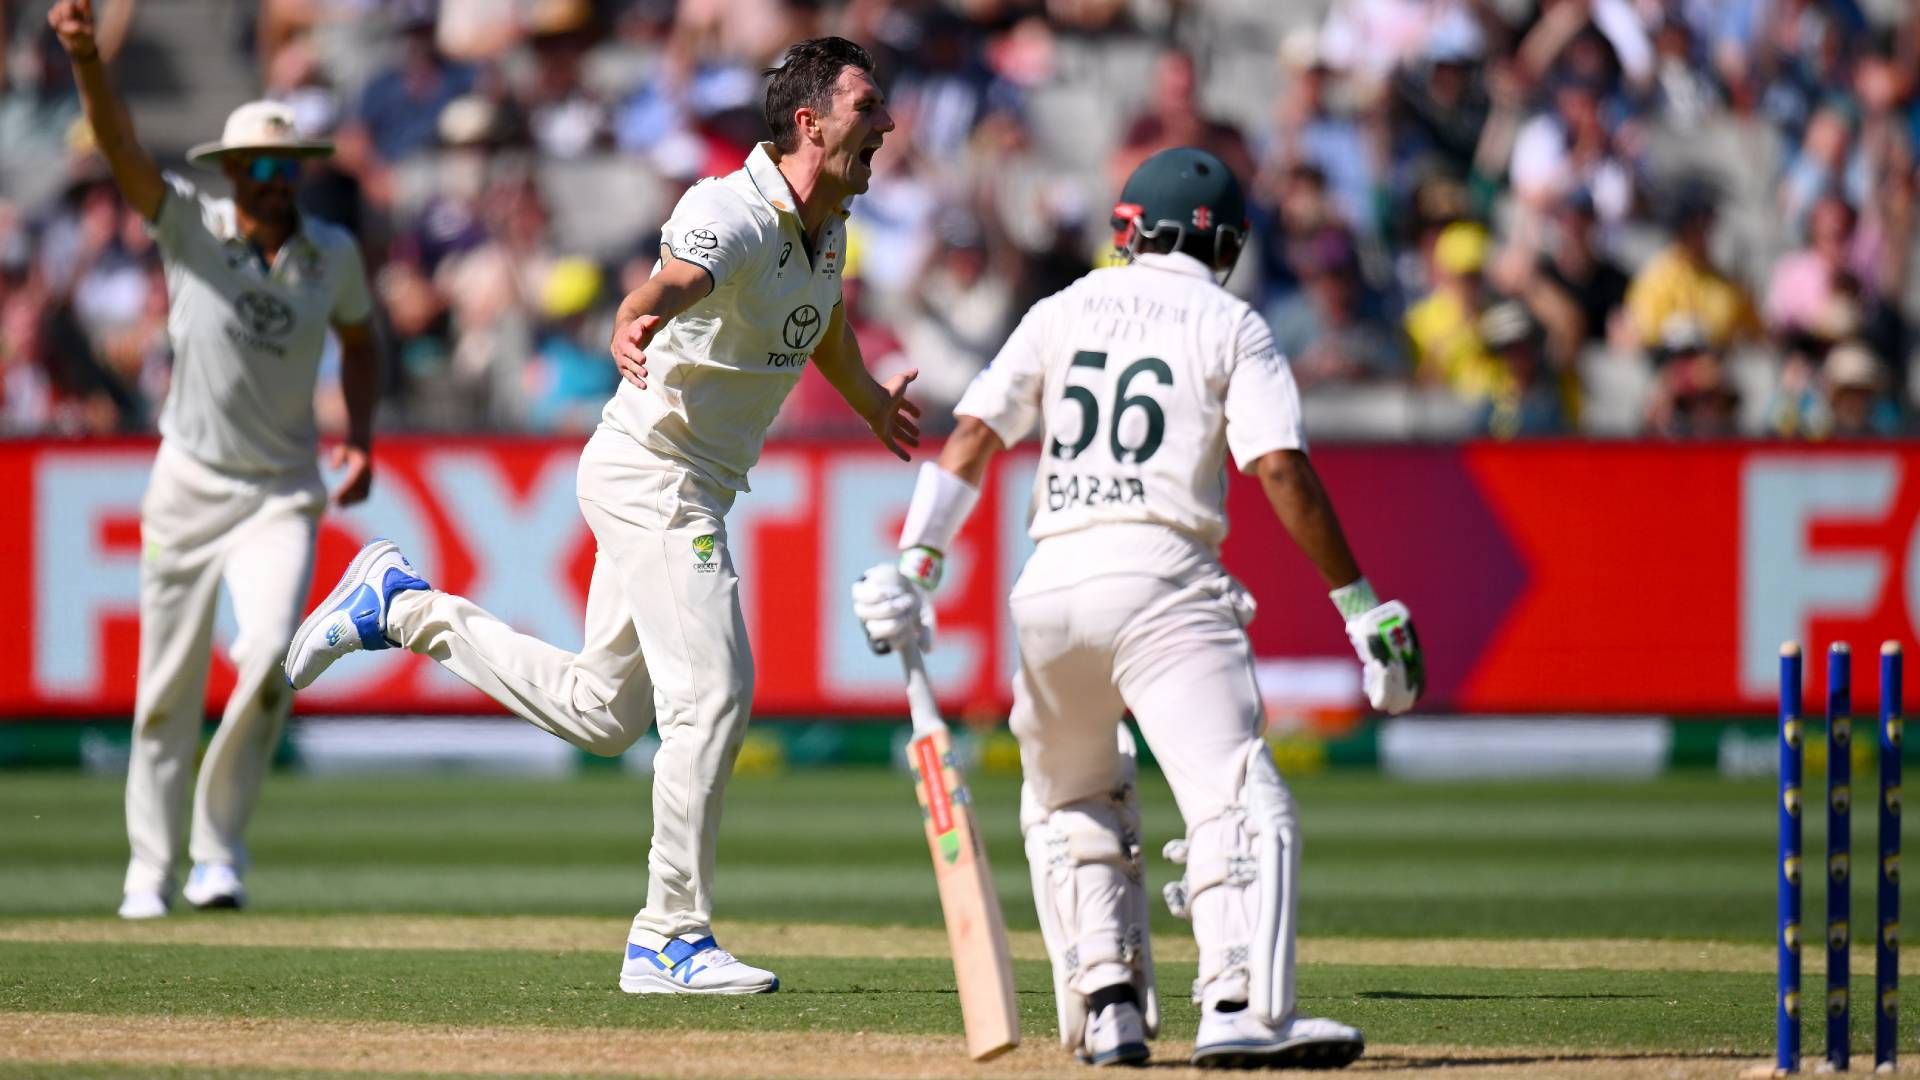 Pakistan's surprise start on day two of Boxing Day Test overwhelmed by elite spell from Pat Cummins